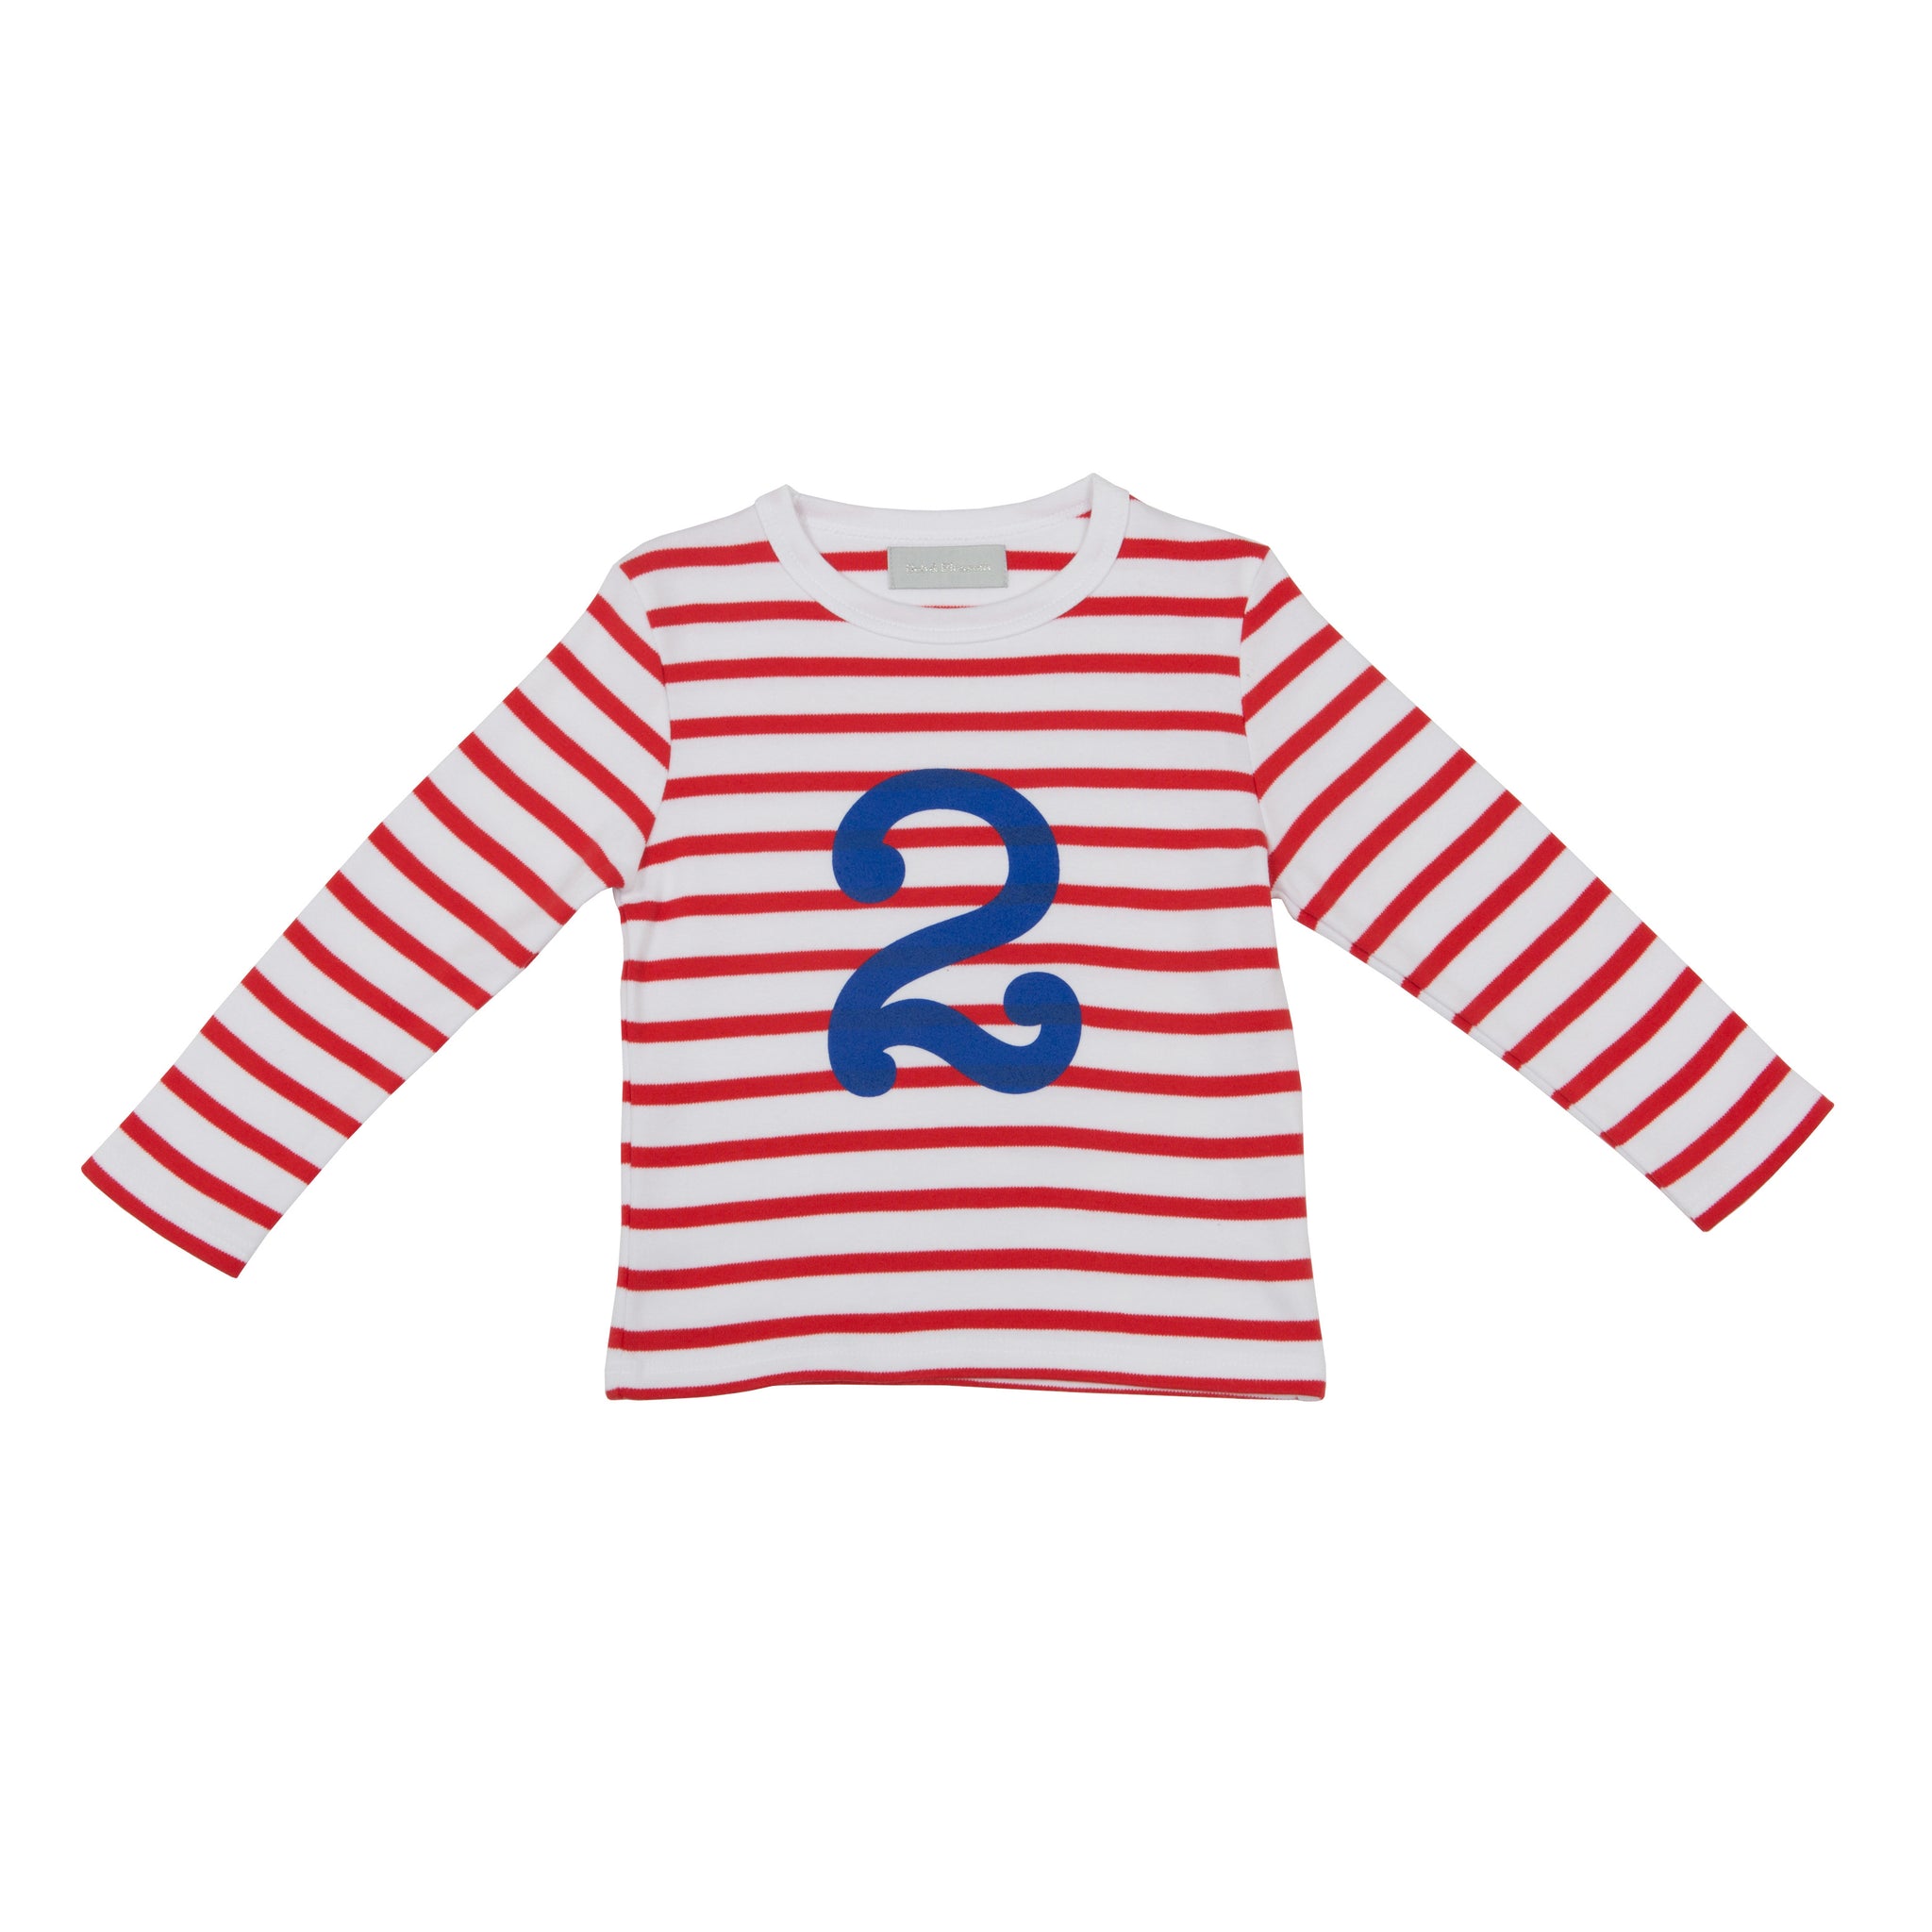 Striped Number T Shirt - Red & White 2-3 Years